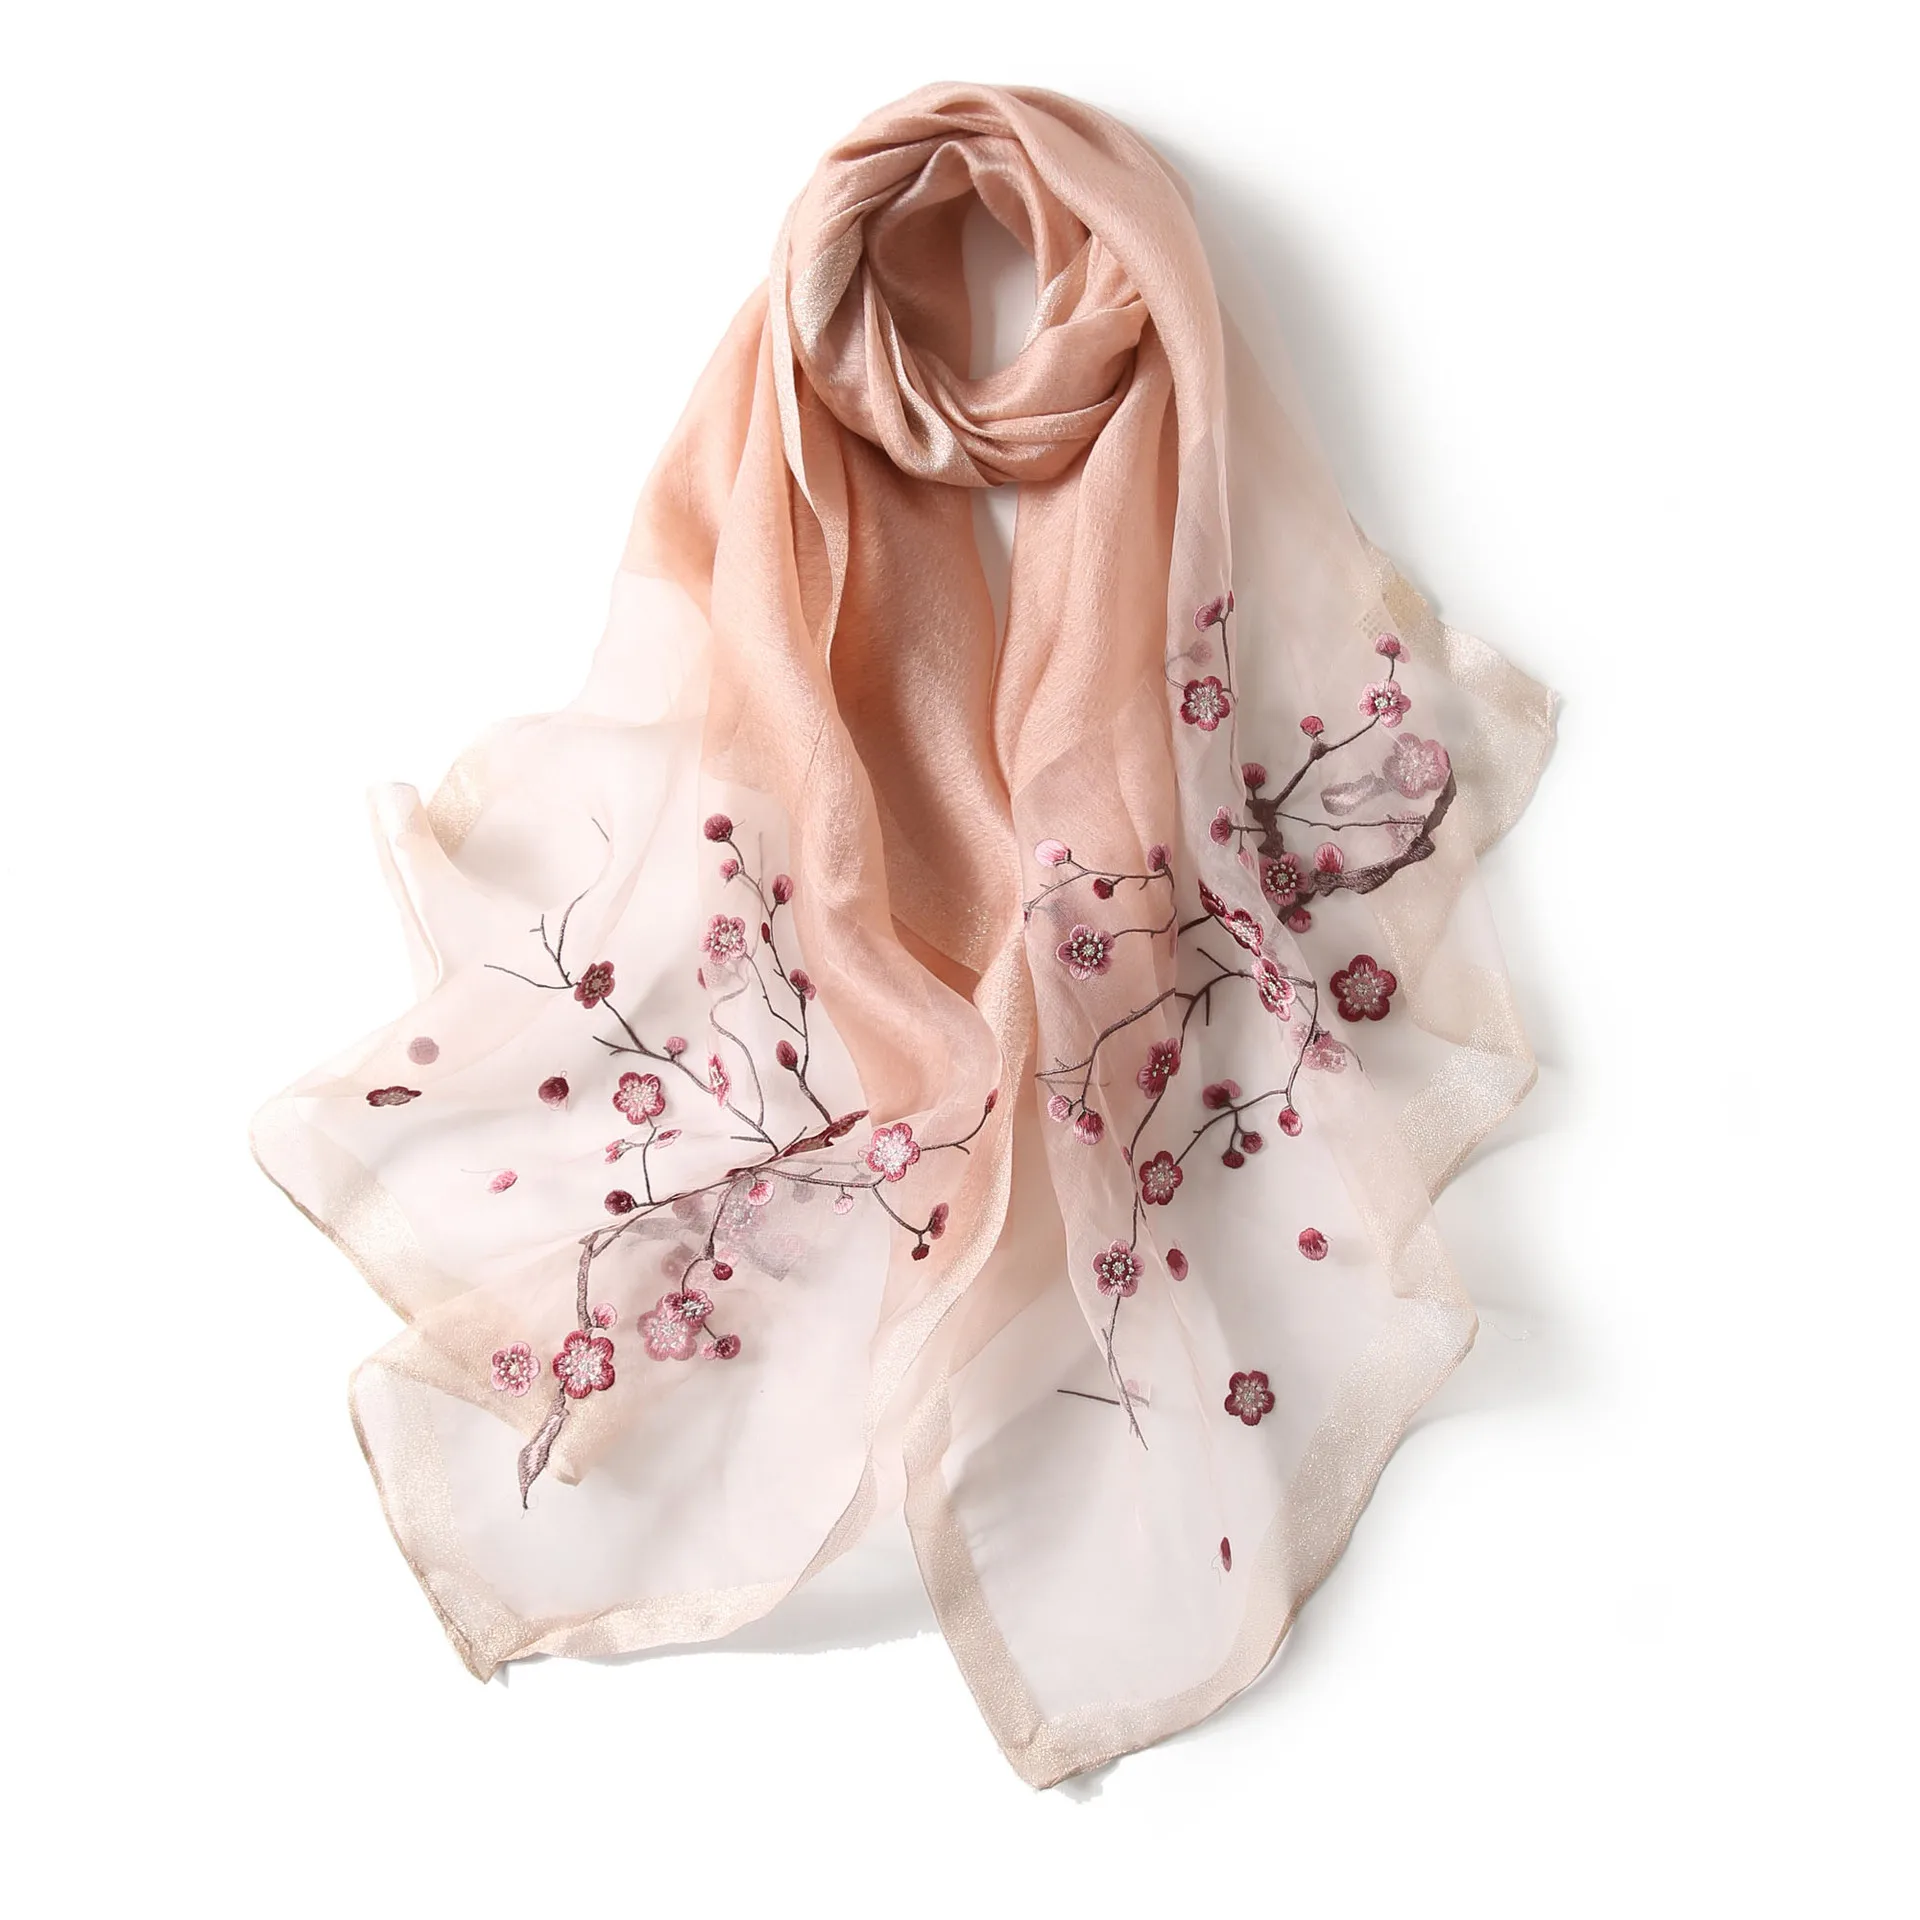 

Silk Wool Scarf Plum Blossom Butterfly Embroidered Women Shawls and Wraps Lady Travel Pashmina High Quality Winter Neck Scarves